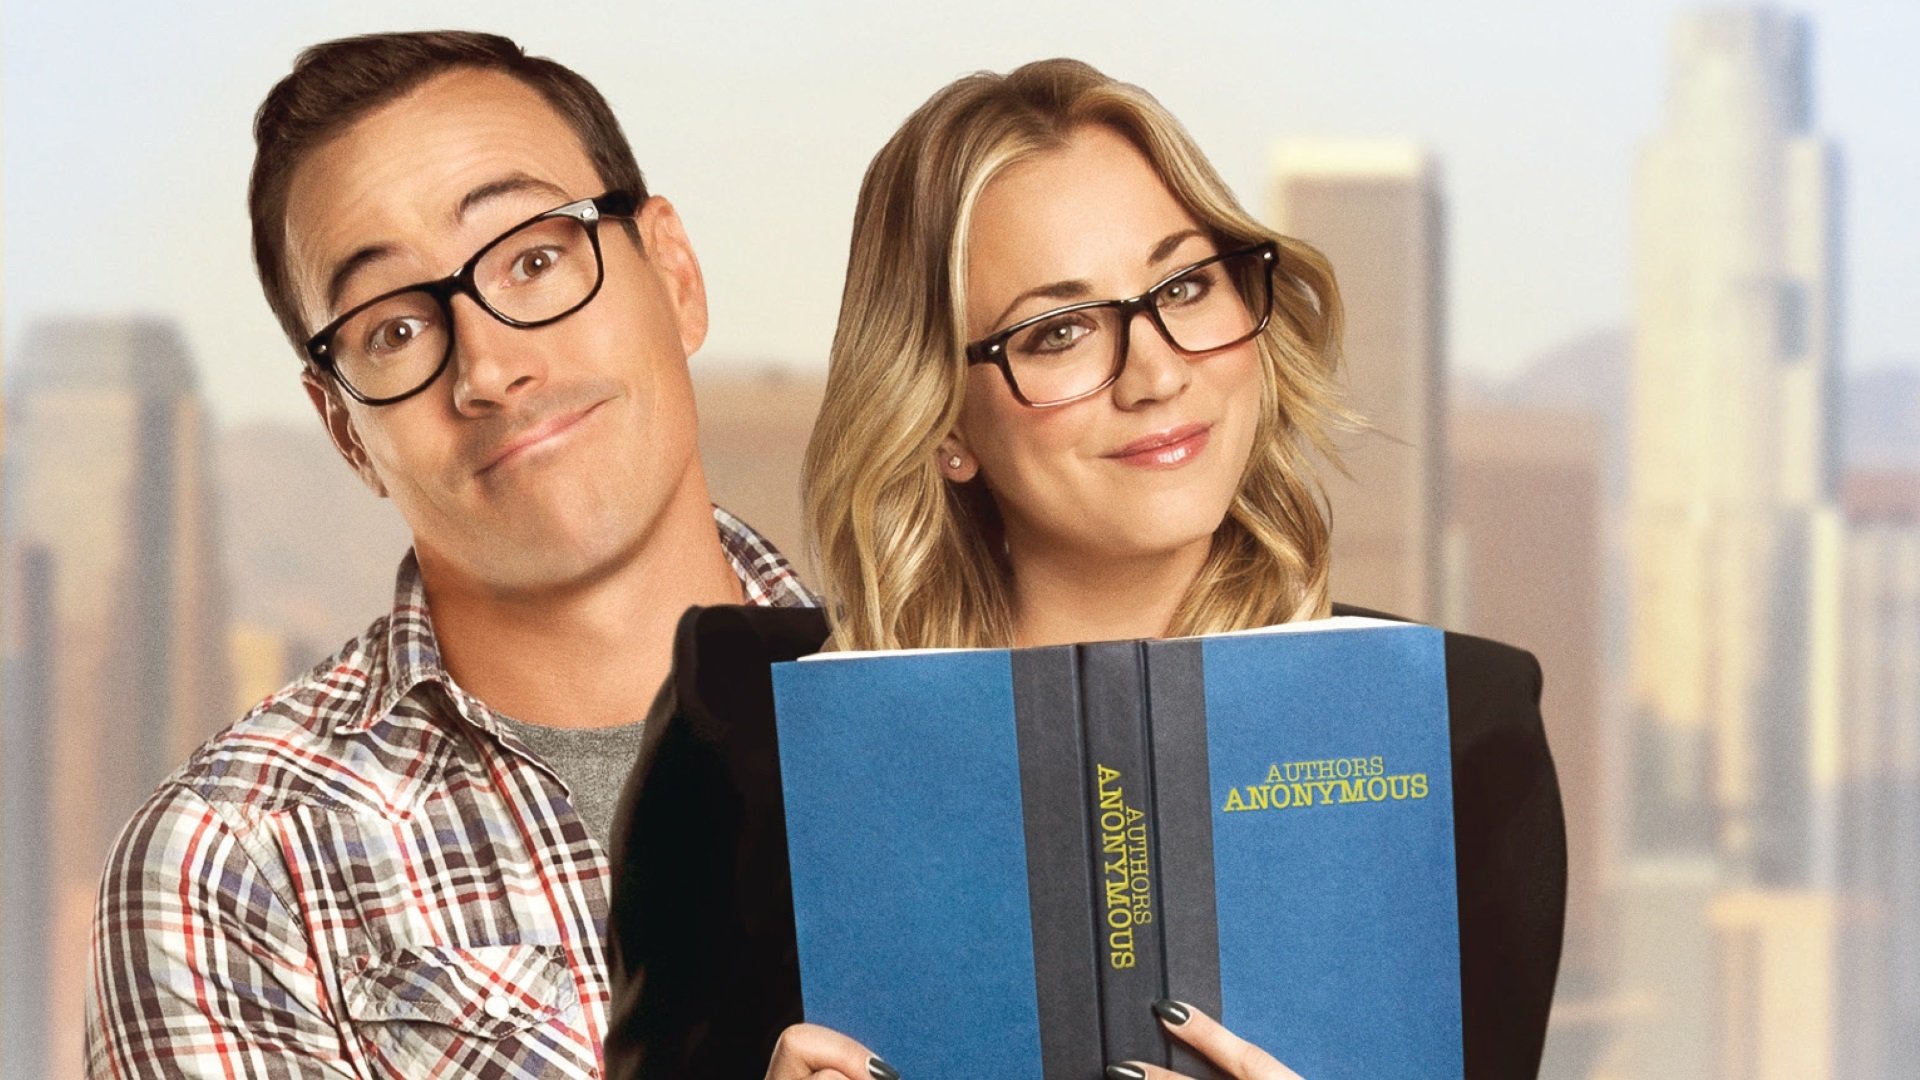 Authors Anonymous 2014 - Rotten Tomatoes